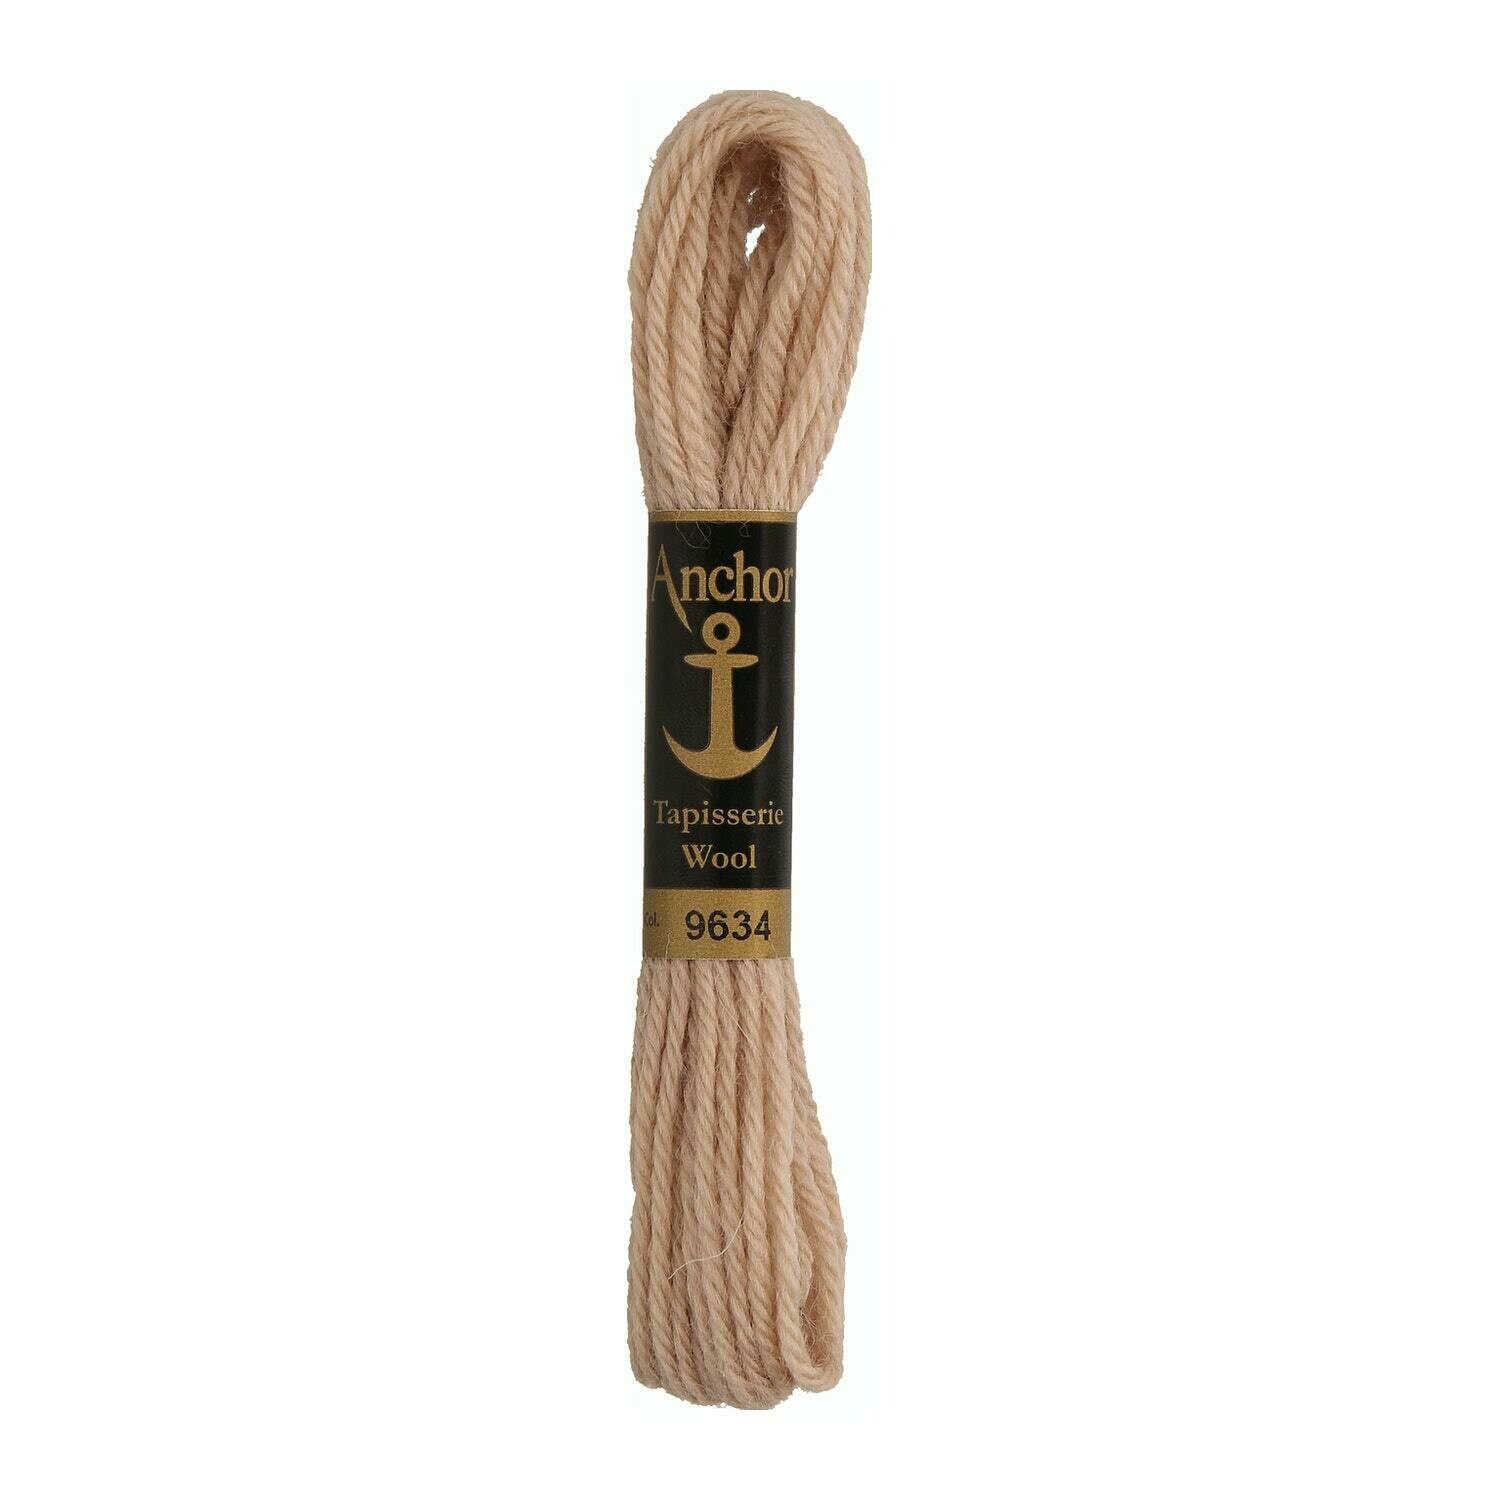 Anchor Tapisserie Wool #09634